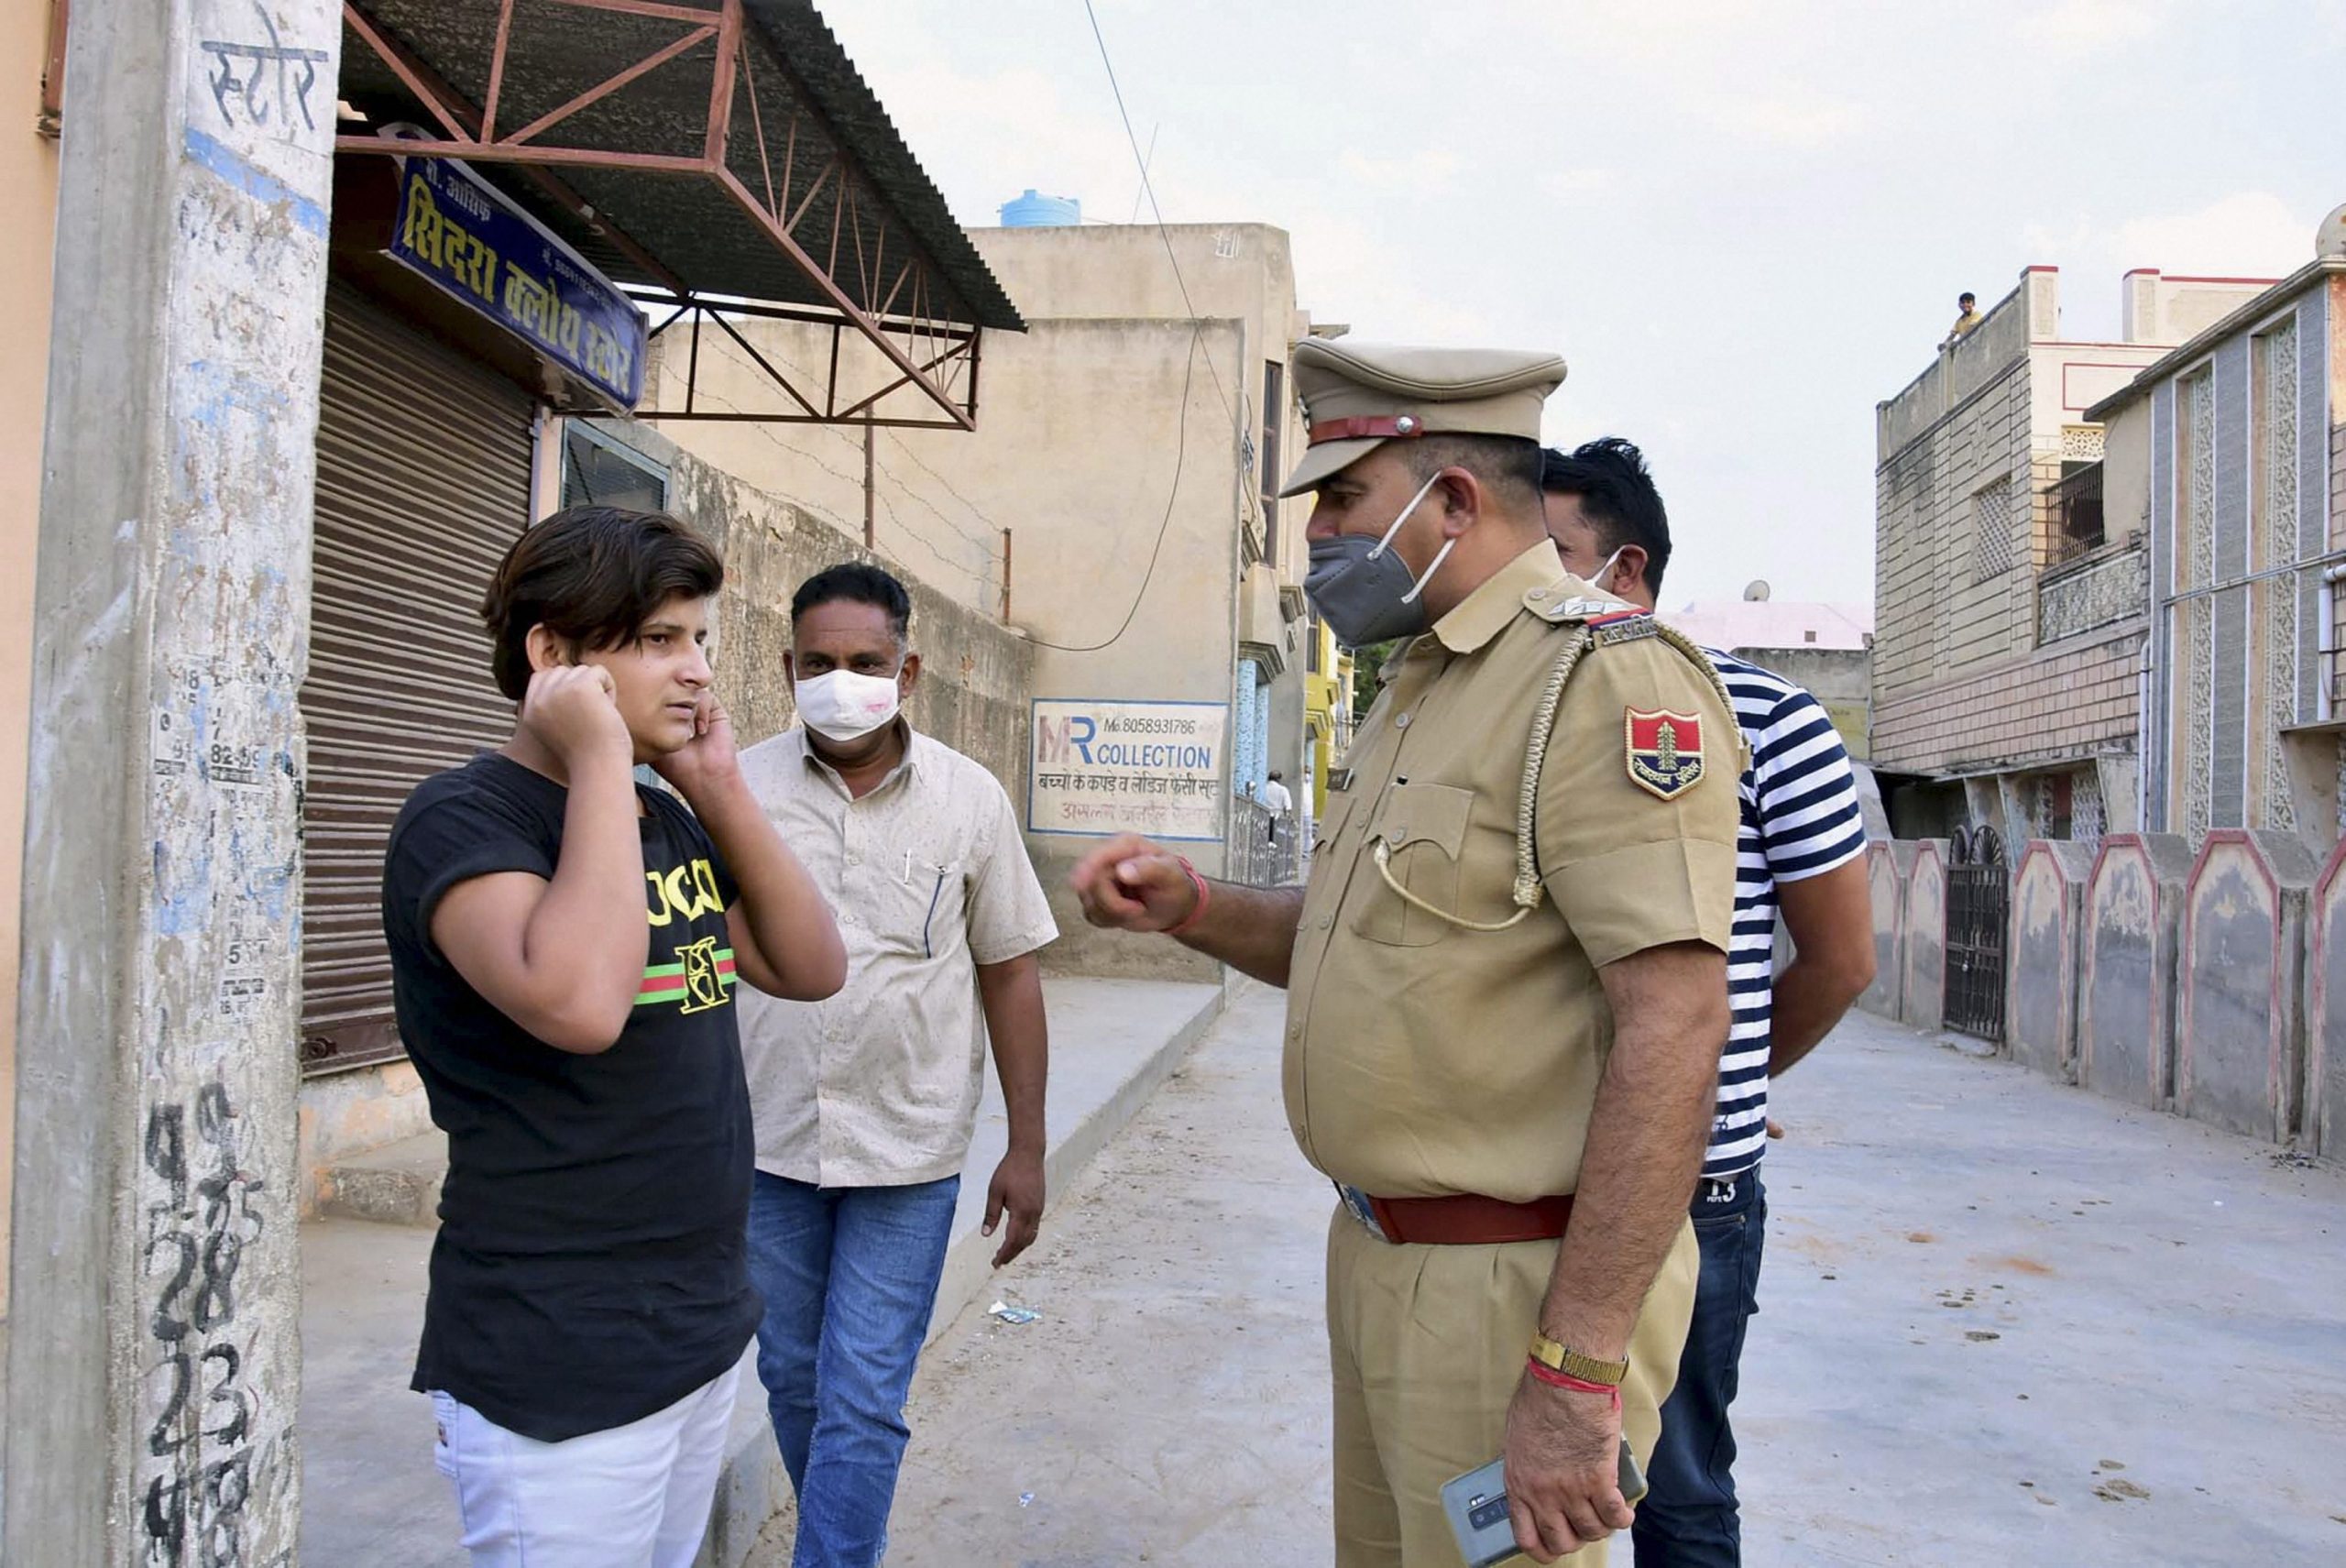 India records 366,161 new COVID-19 cases, 3,754 deaths in last 24 hours